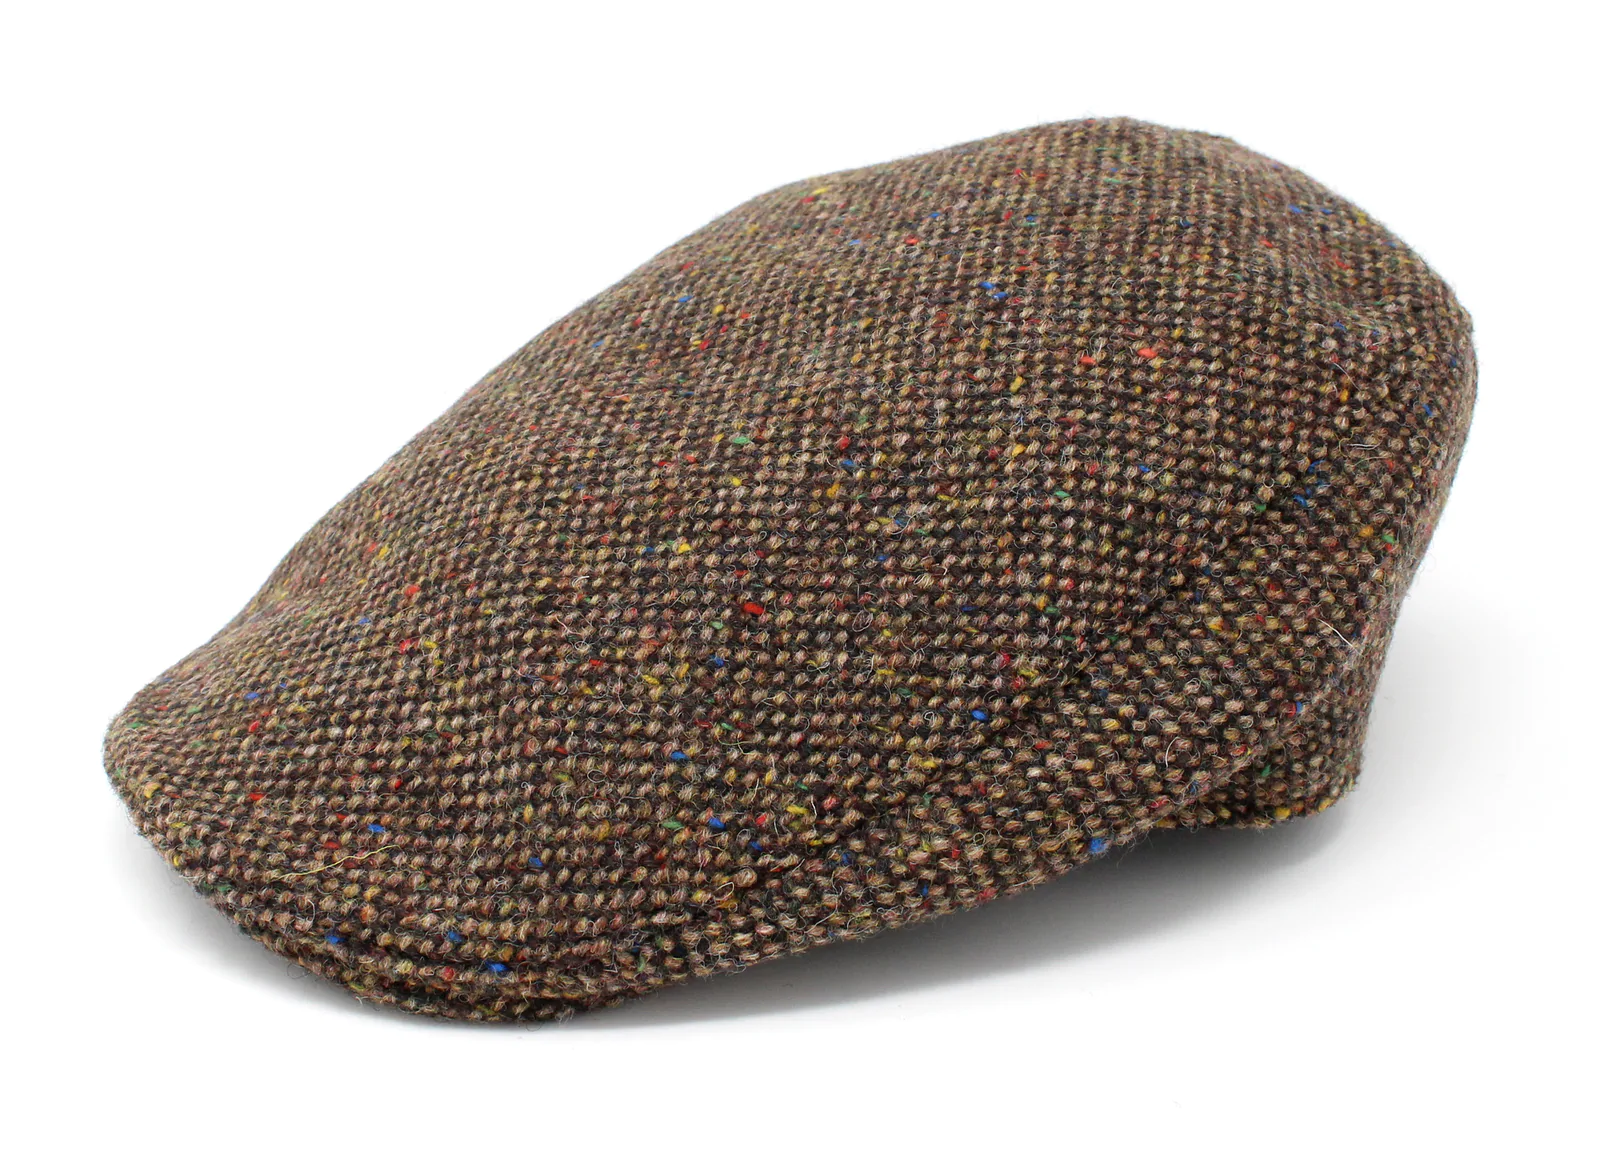 A brown hat with multicolored speckles on it.